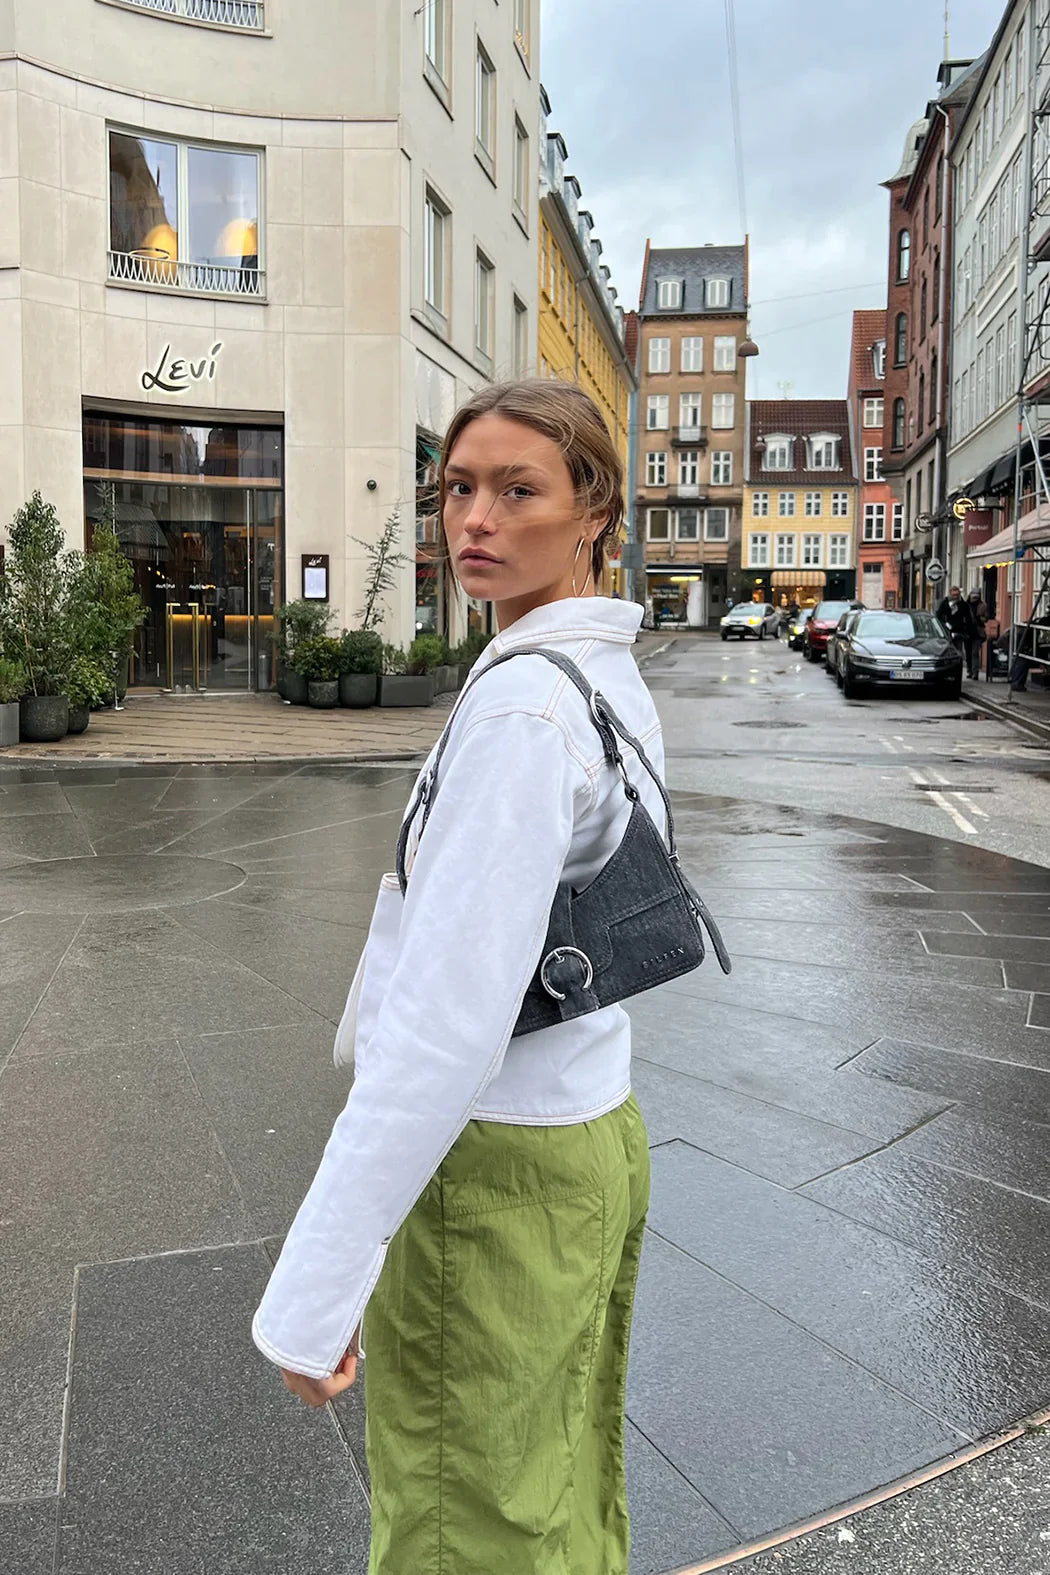 ALBA SHOULDER BAG - EXCLUSIVE Bags from SILFEN STUDIO - Just €79.99! SHOP NOW AT IAMINHATELOVE BOTH IN STORE FOR CYPRUS AND ONLINE WORLDWIDE @ IAMINHATELOVE.COM